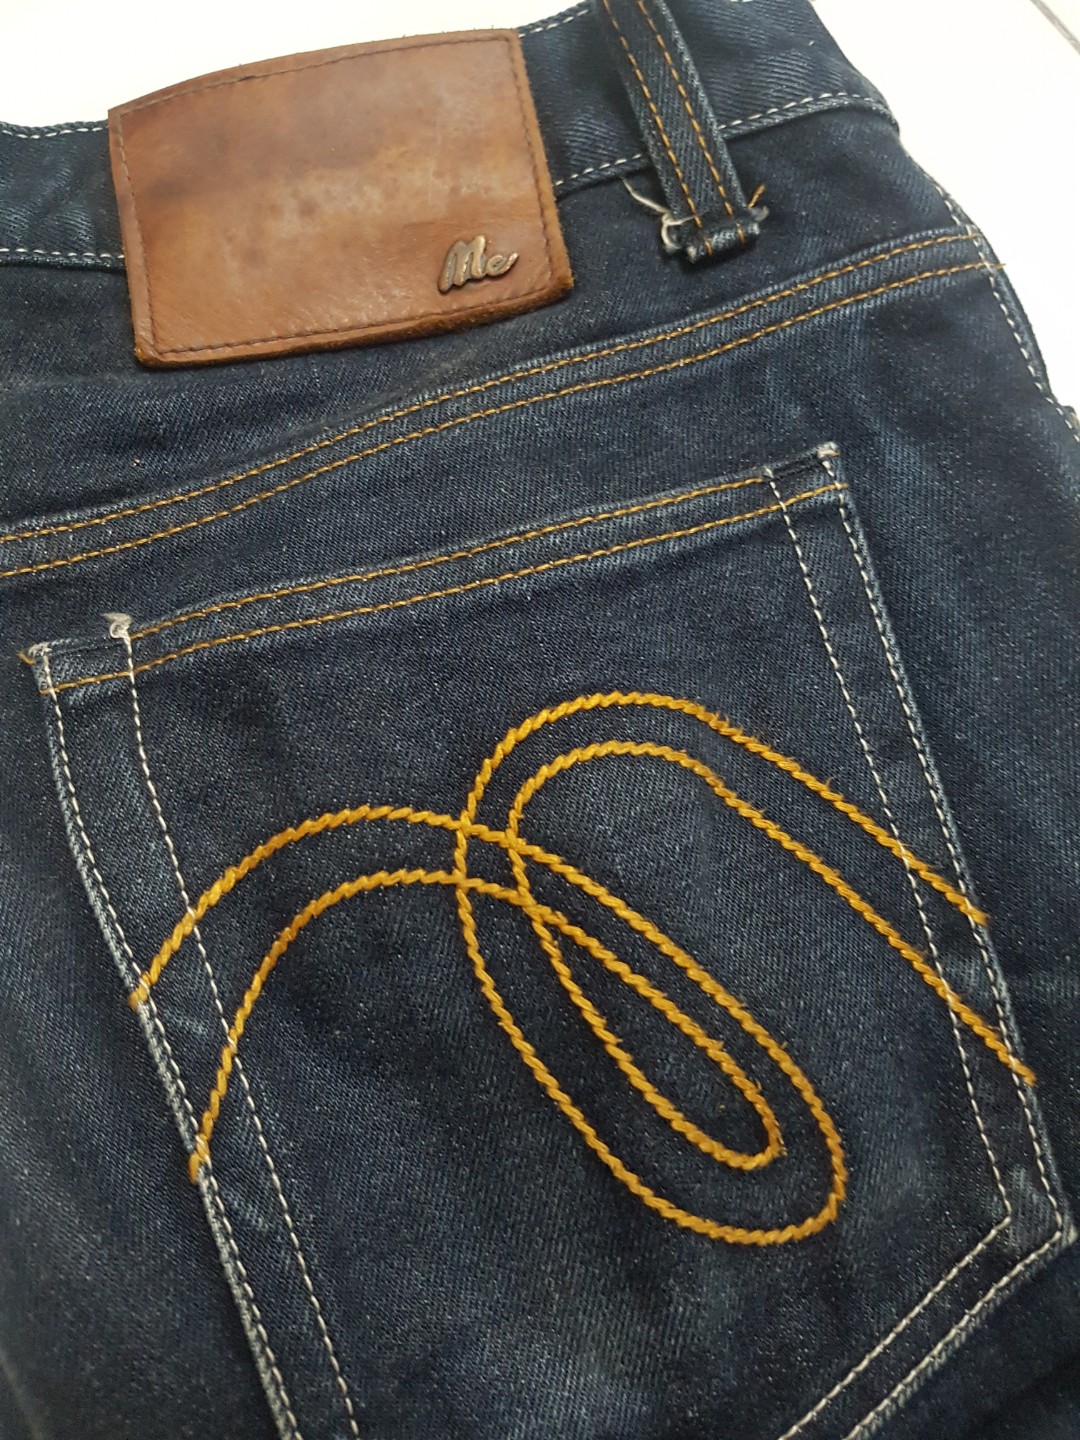 MC Jeans Fashion, Bottoms, on Carousell